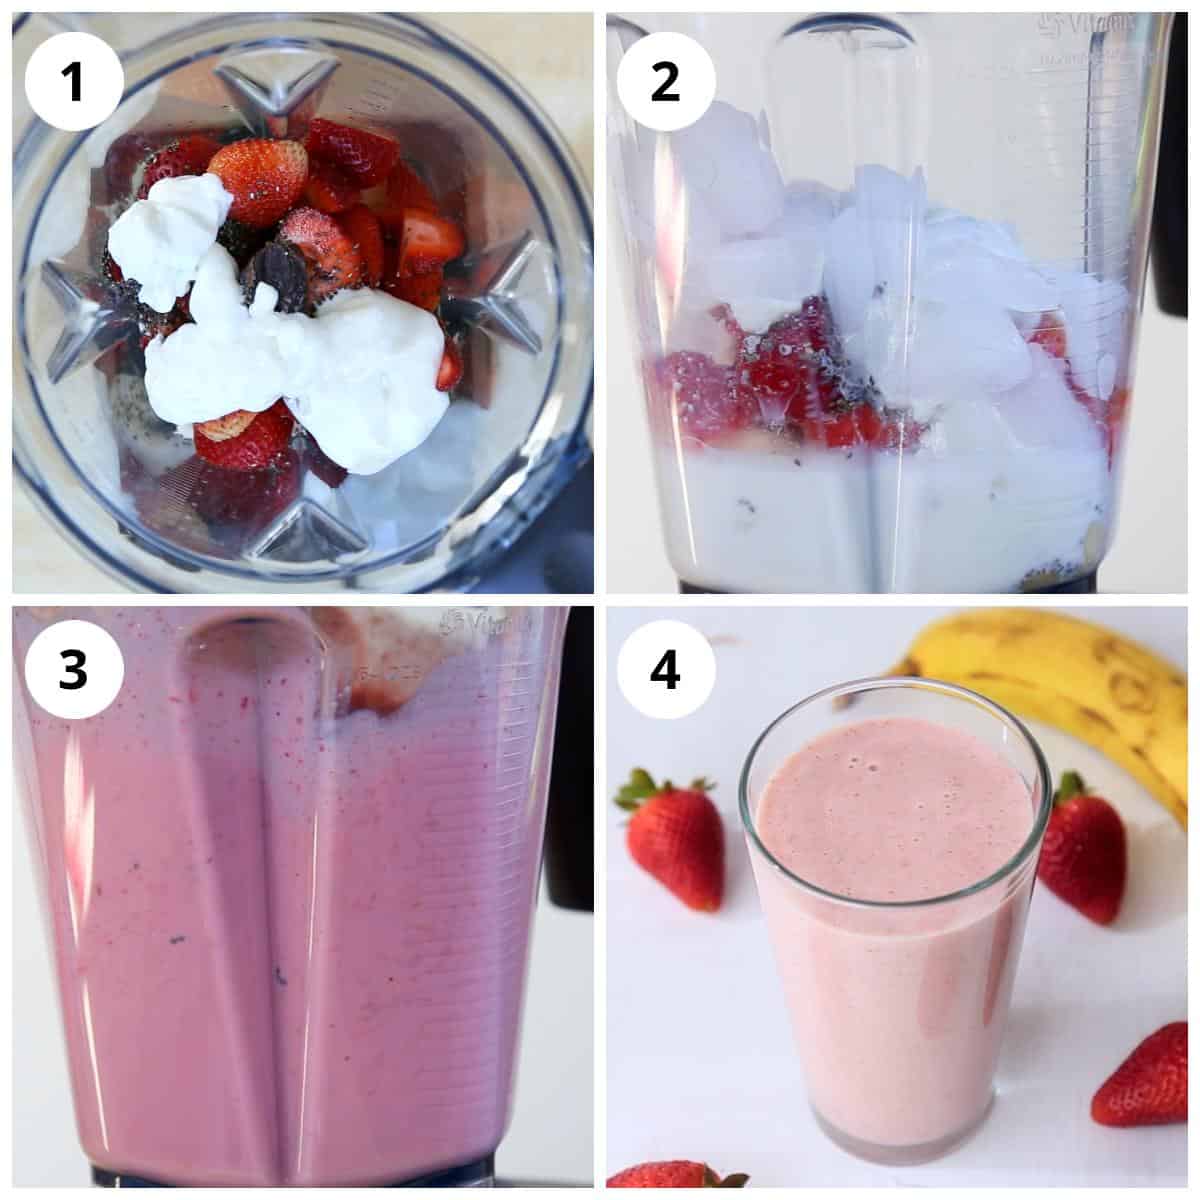 Steps for adding and blending ingredients for Strawberry Banana Smoothie